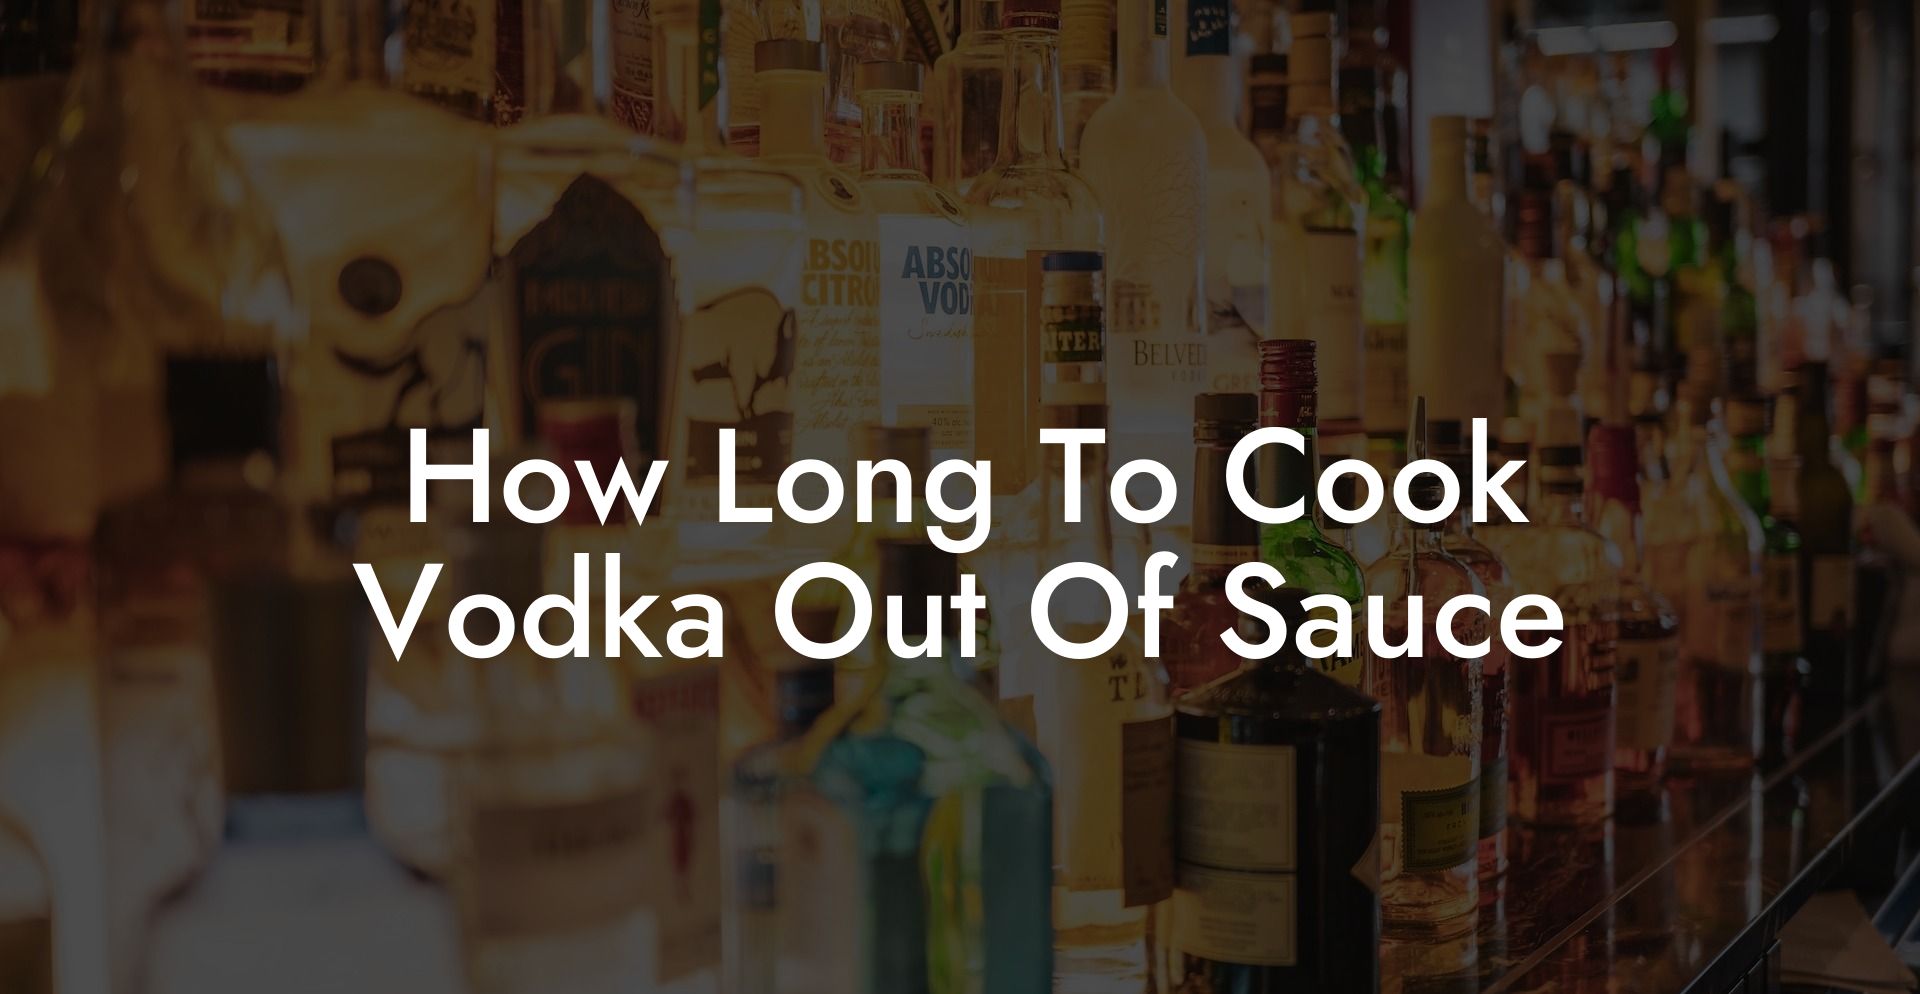 How Long To Cook Vodka Out Of Sauce